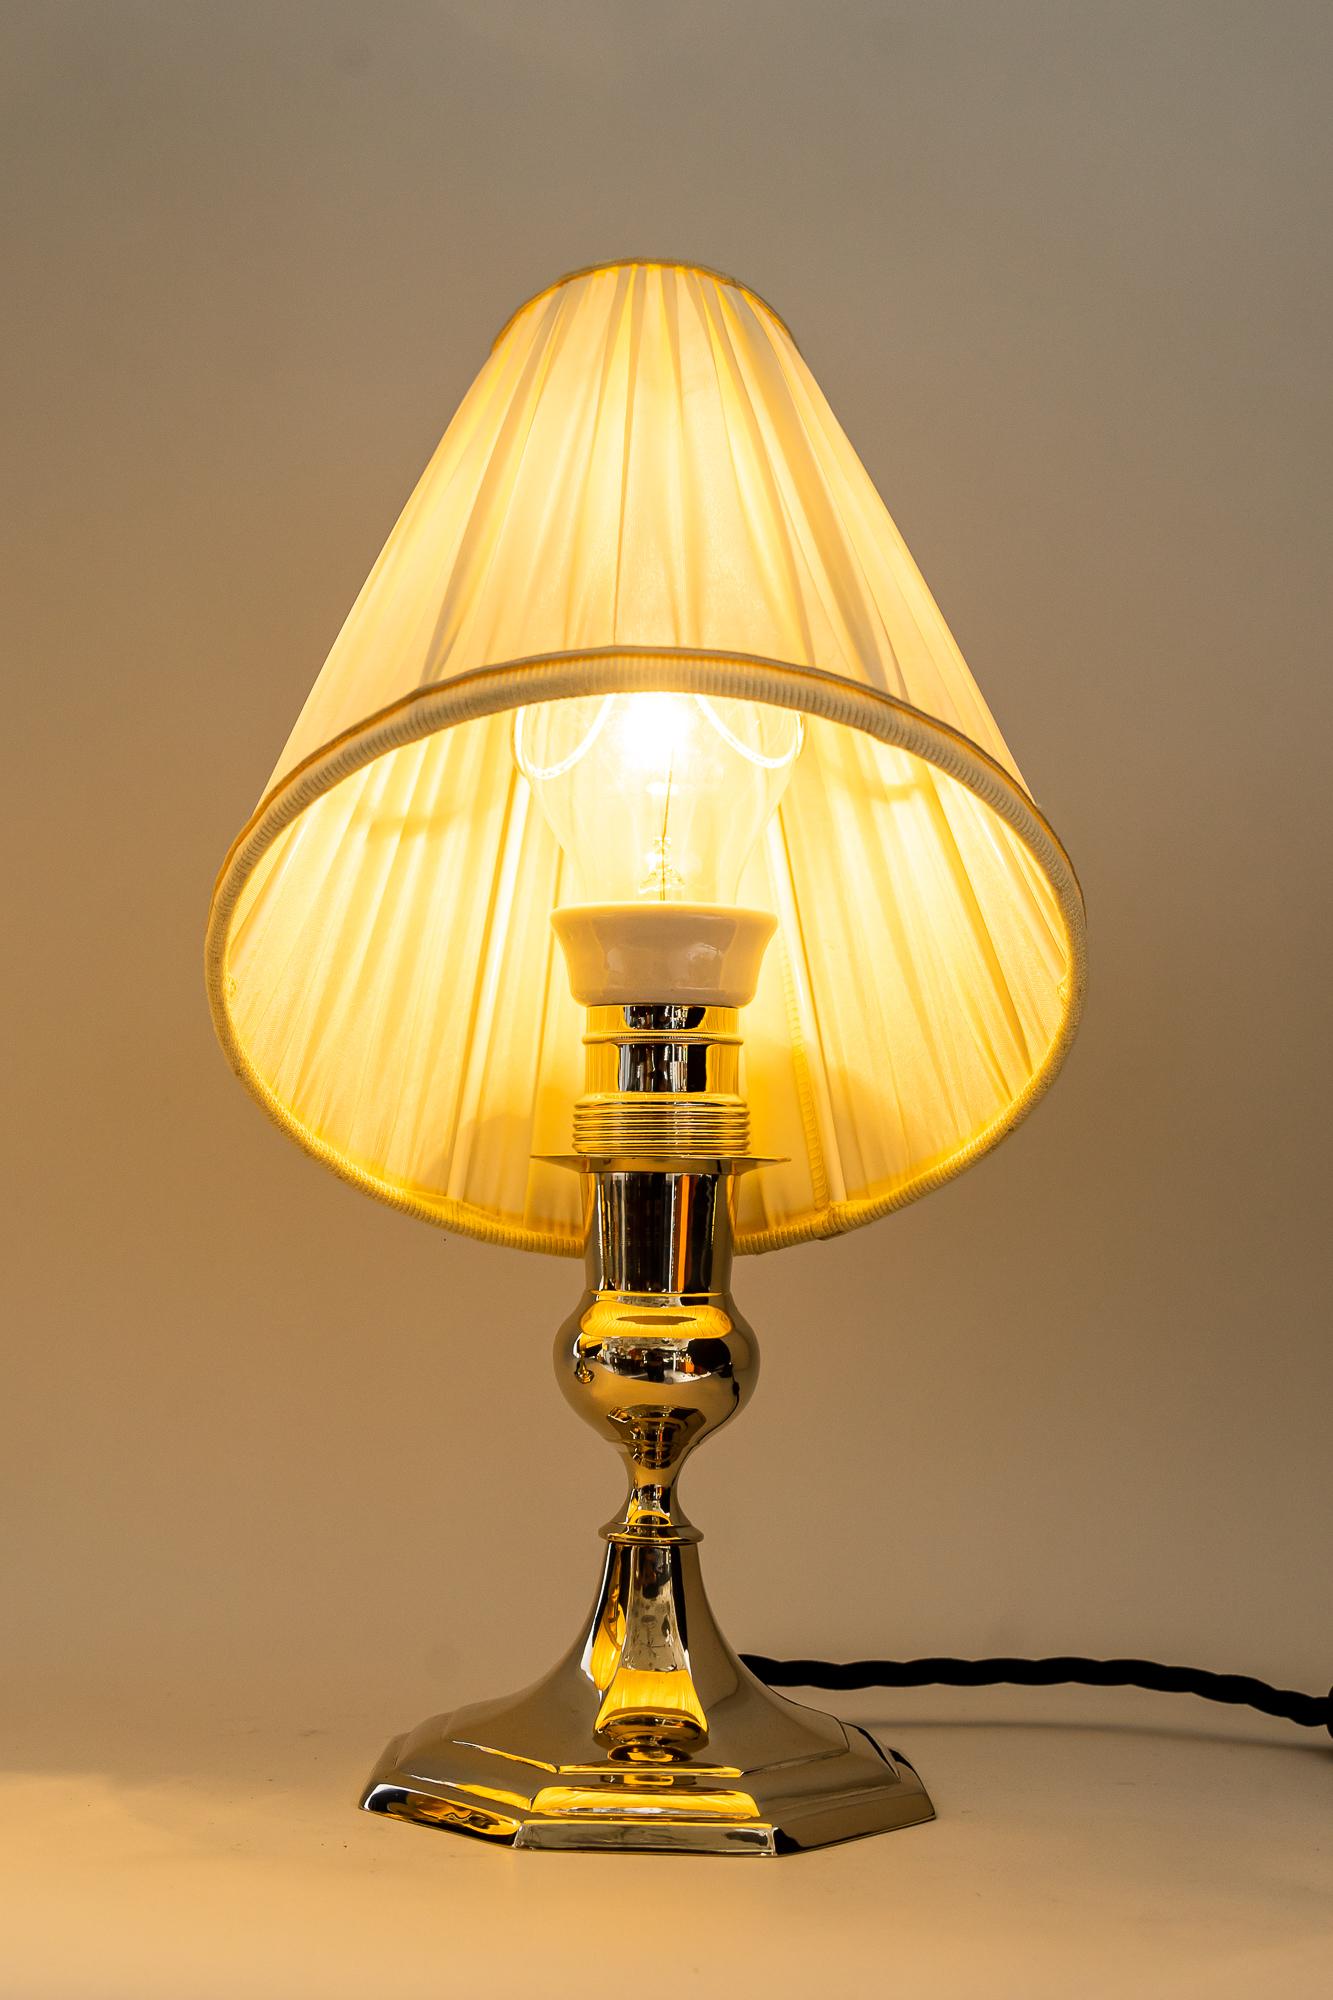 2 Art Deco Table Lamps with Fabric Shades, Vienna, Around 1920s  For Sale 4